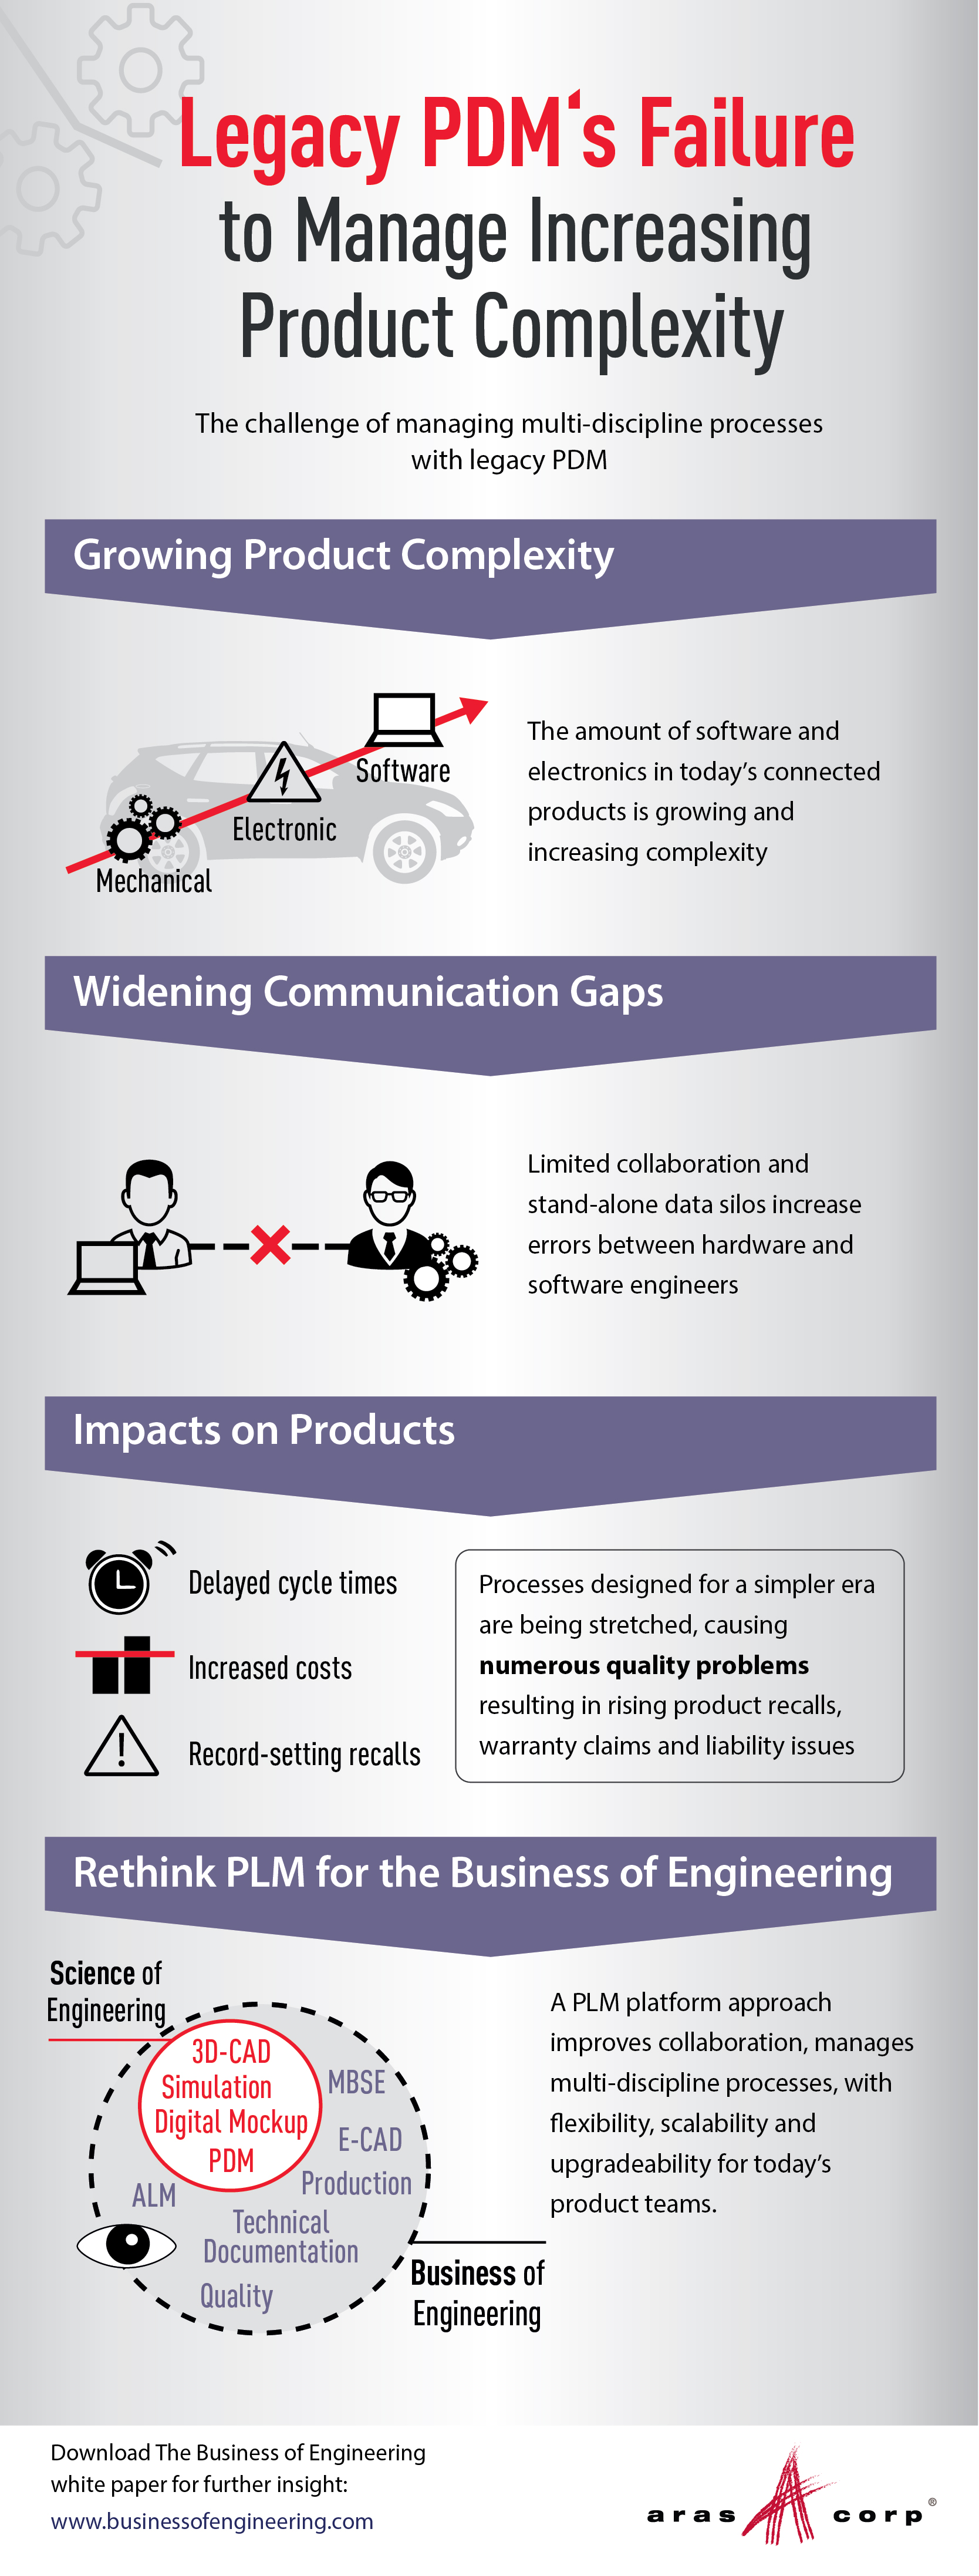 Business of Engineering Infographic